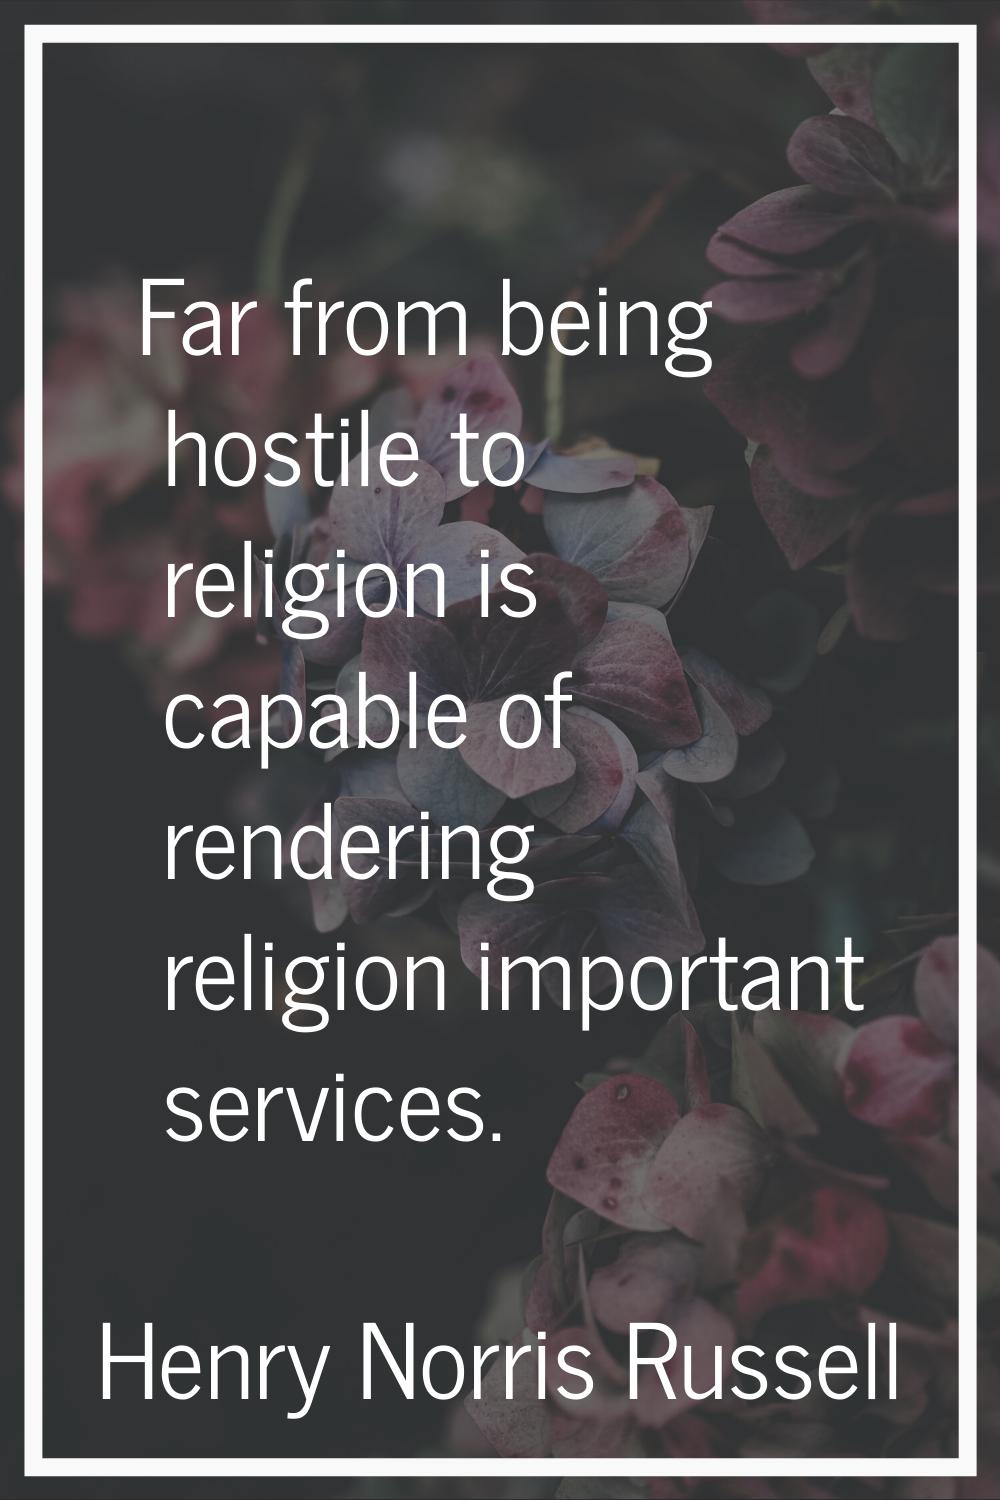 Far from being hostile to religion is capable of rendering religion important services.